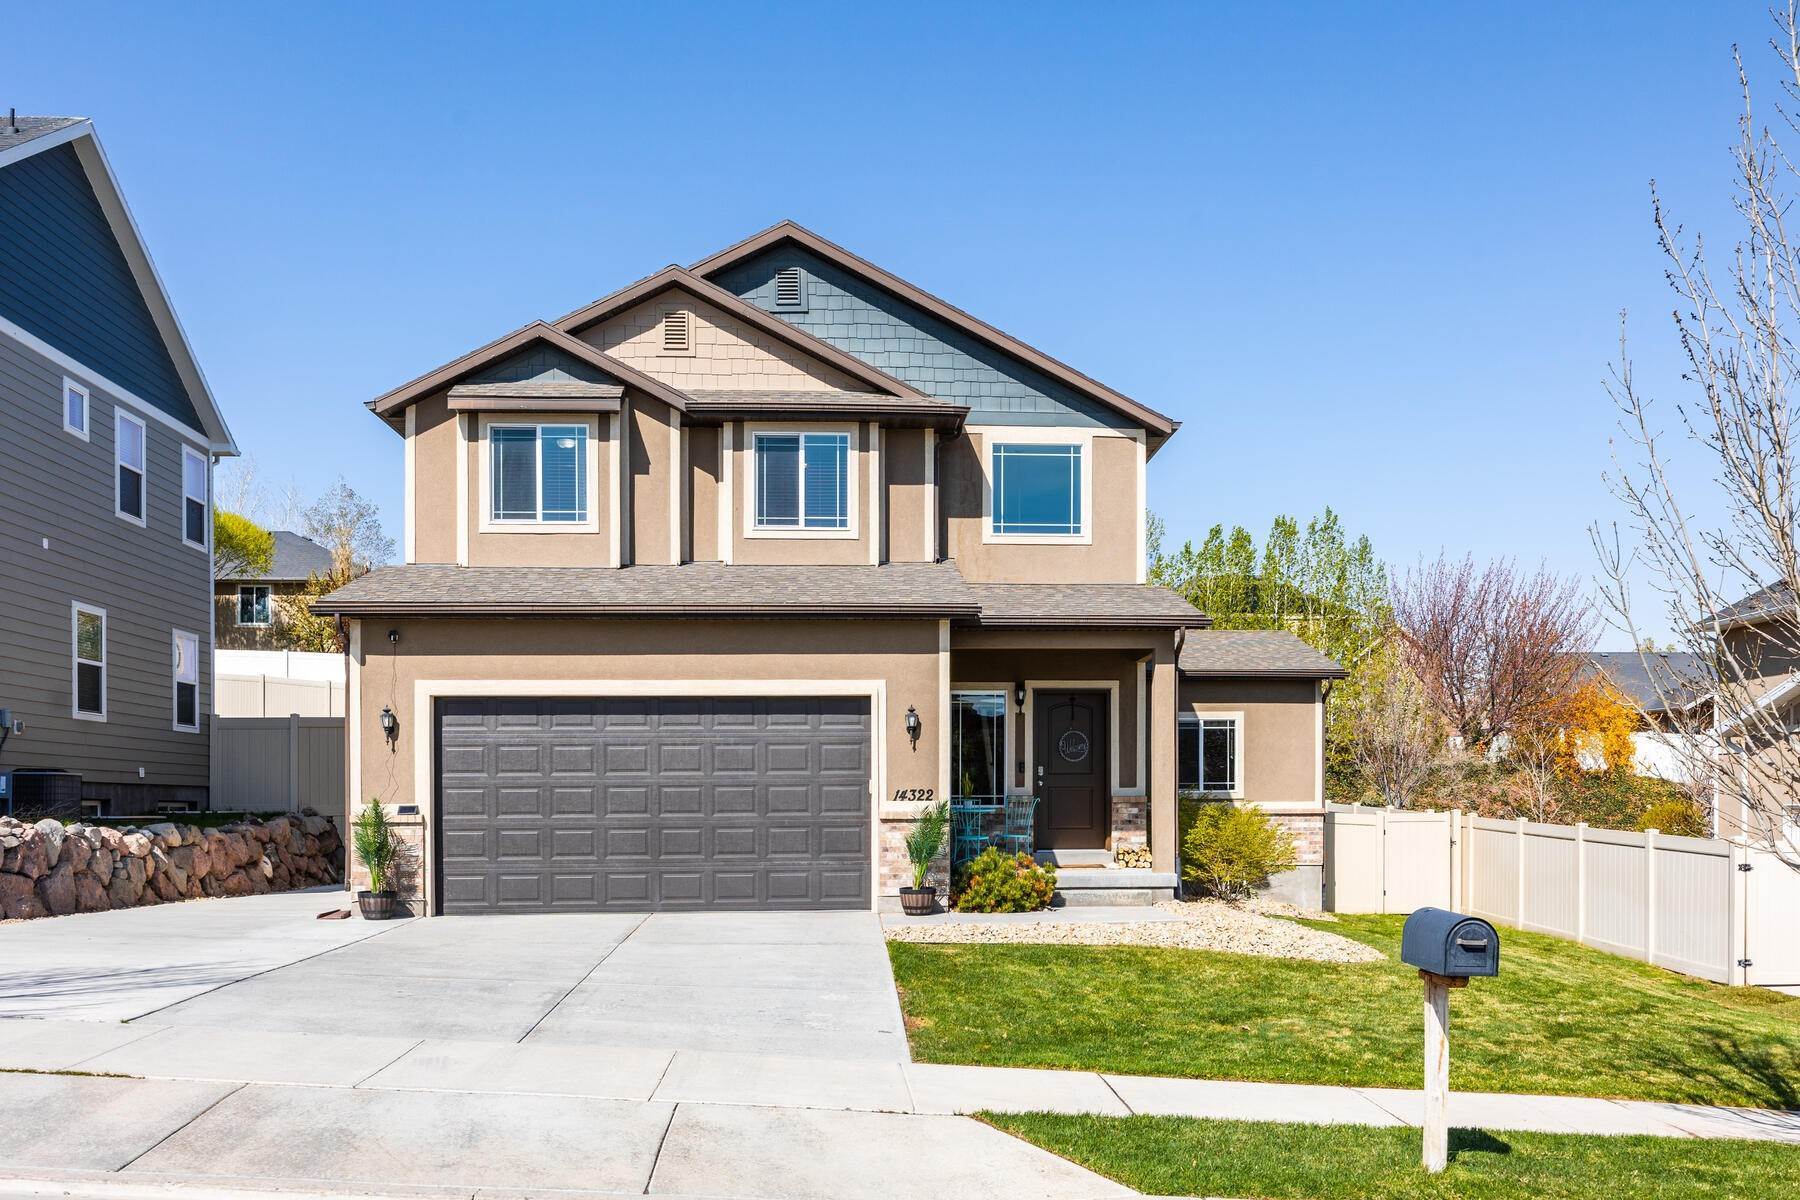 Single Family Homes for Sale at Come See What it Feels Like to Spread Your Wings 14322 S Highfield Dr Herriman, Utah 84096 United States